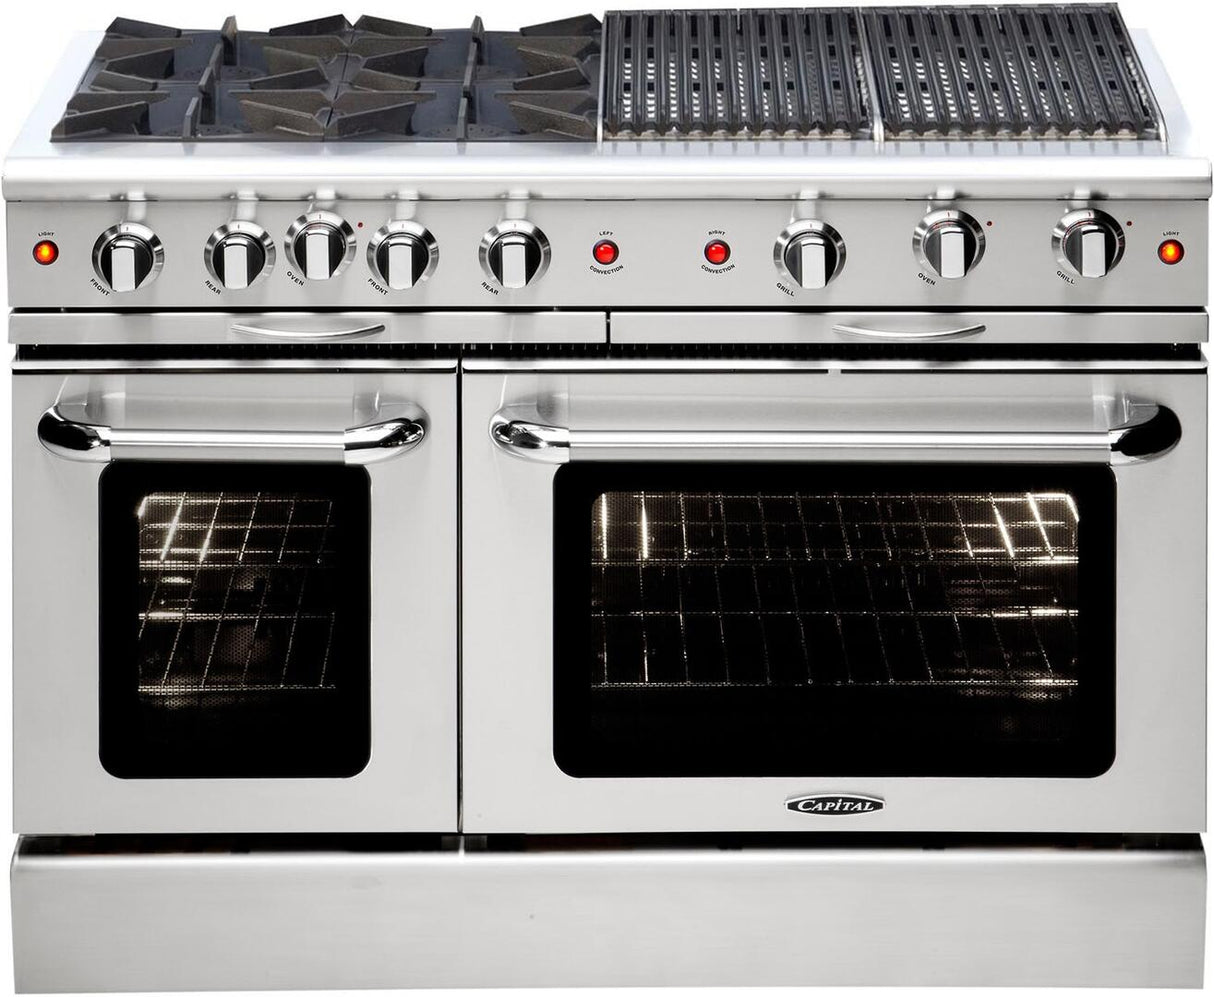 Capital Culinarian Series 48" Freestanding All Gas Range 8 Open Burners, Double Ovens, 7.6 cu in Stainless Steel (MCOR488)